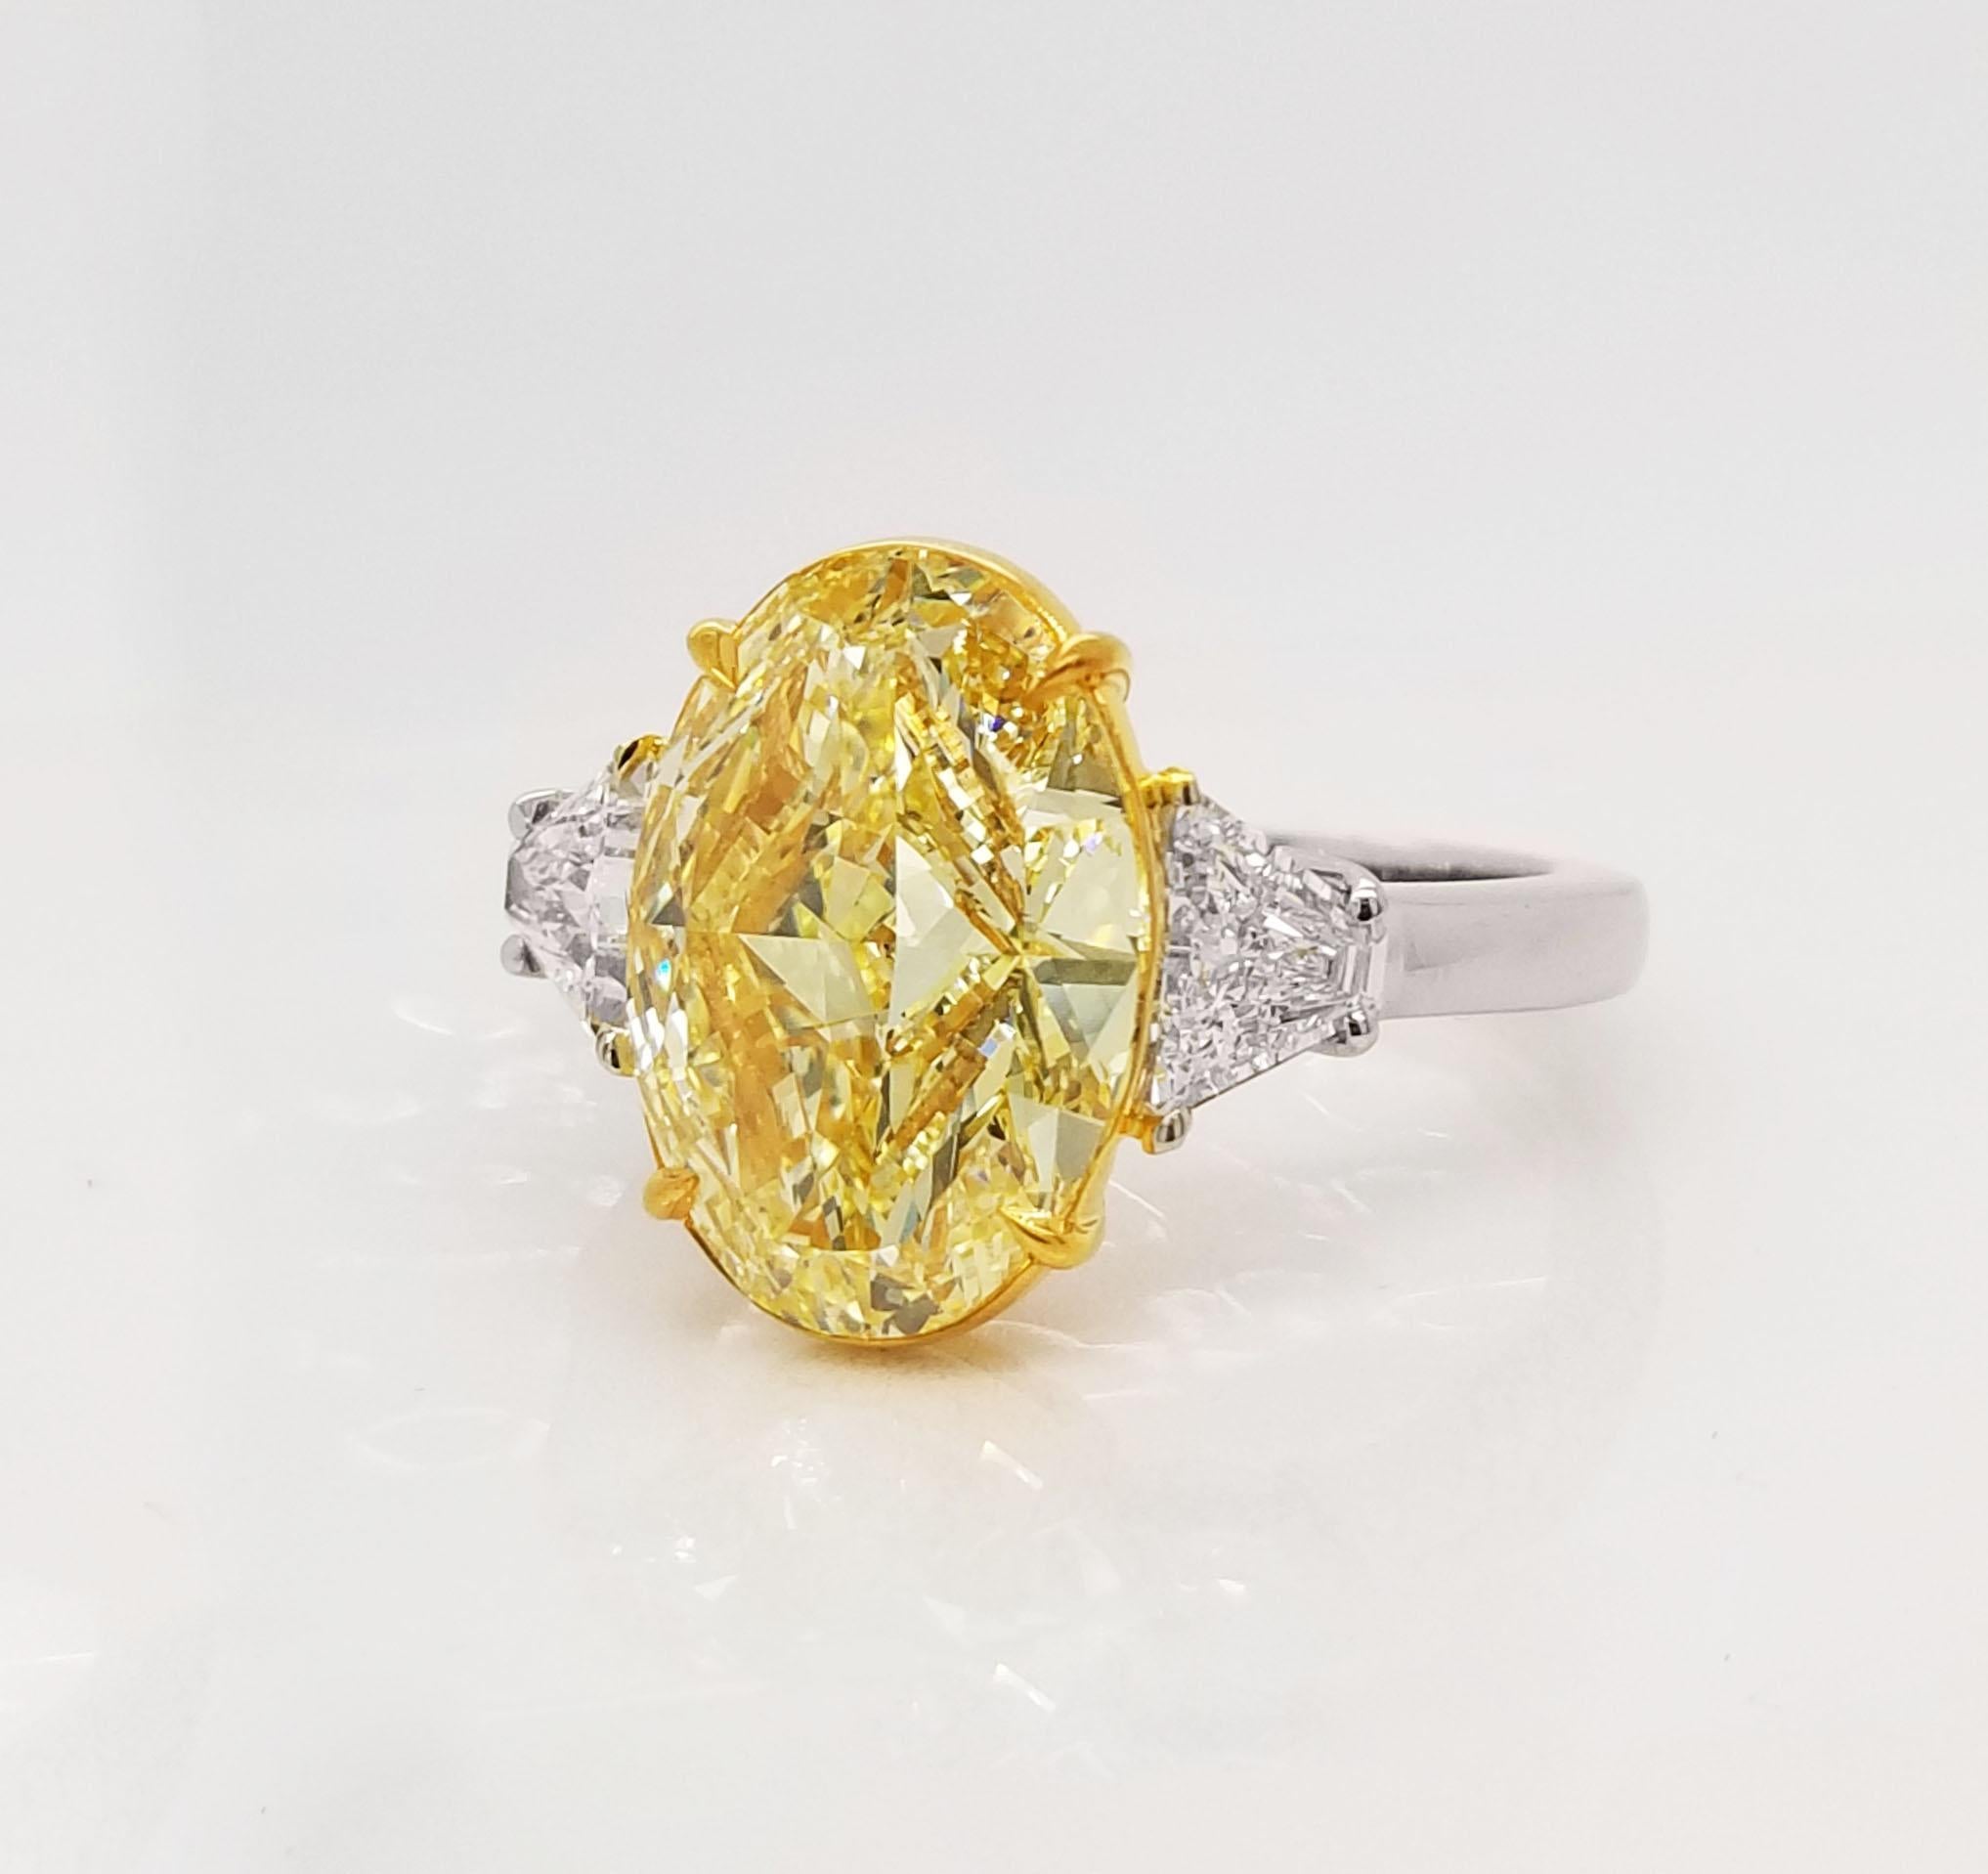 From SCARSELLI, this beautiful engagement ring features an over 5-carat Fancy Yellow Oval cut diamond (see certificate picture for detailed stone's information) flanked by 2 trapezoids totaling 0.66ct (0.33 each). Handmade setting in Platinum and